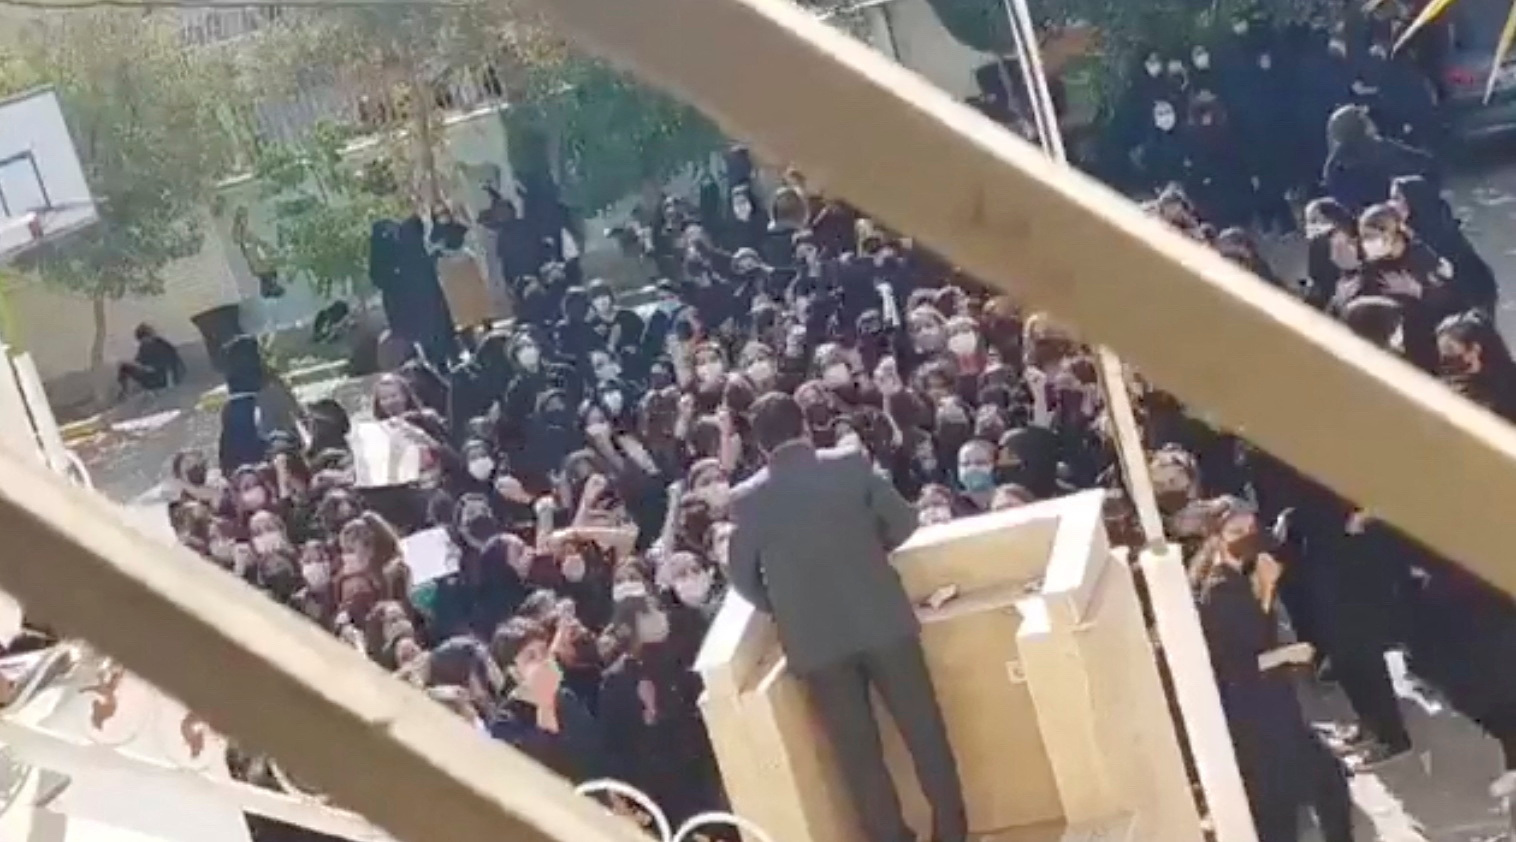 Female protesters react and chant towards a man standing at a podium in Shiraz